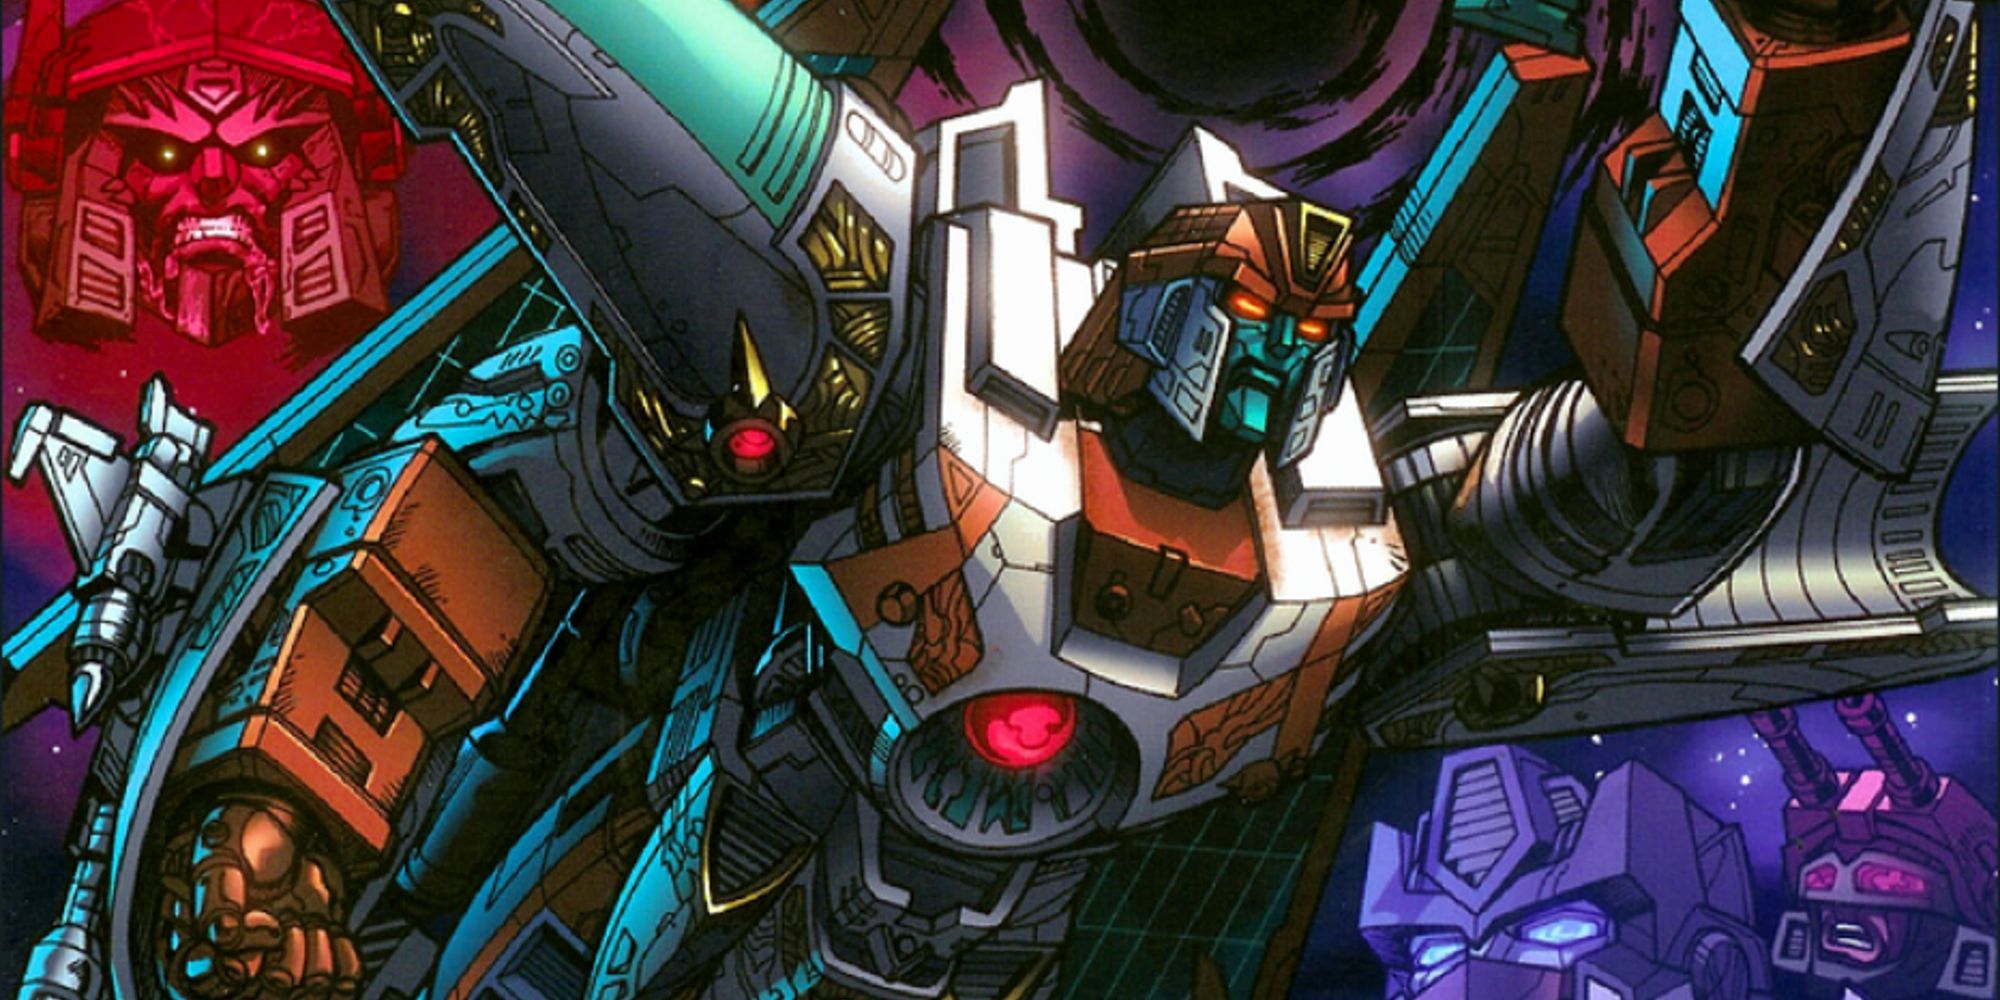 Vector Prime flying through space with a sword in Transformers Cybertron comics